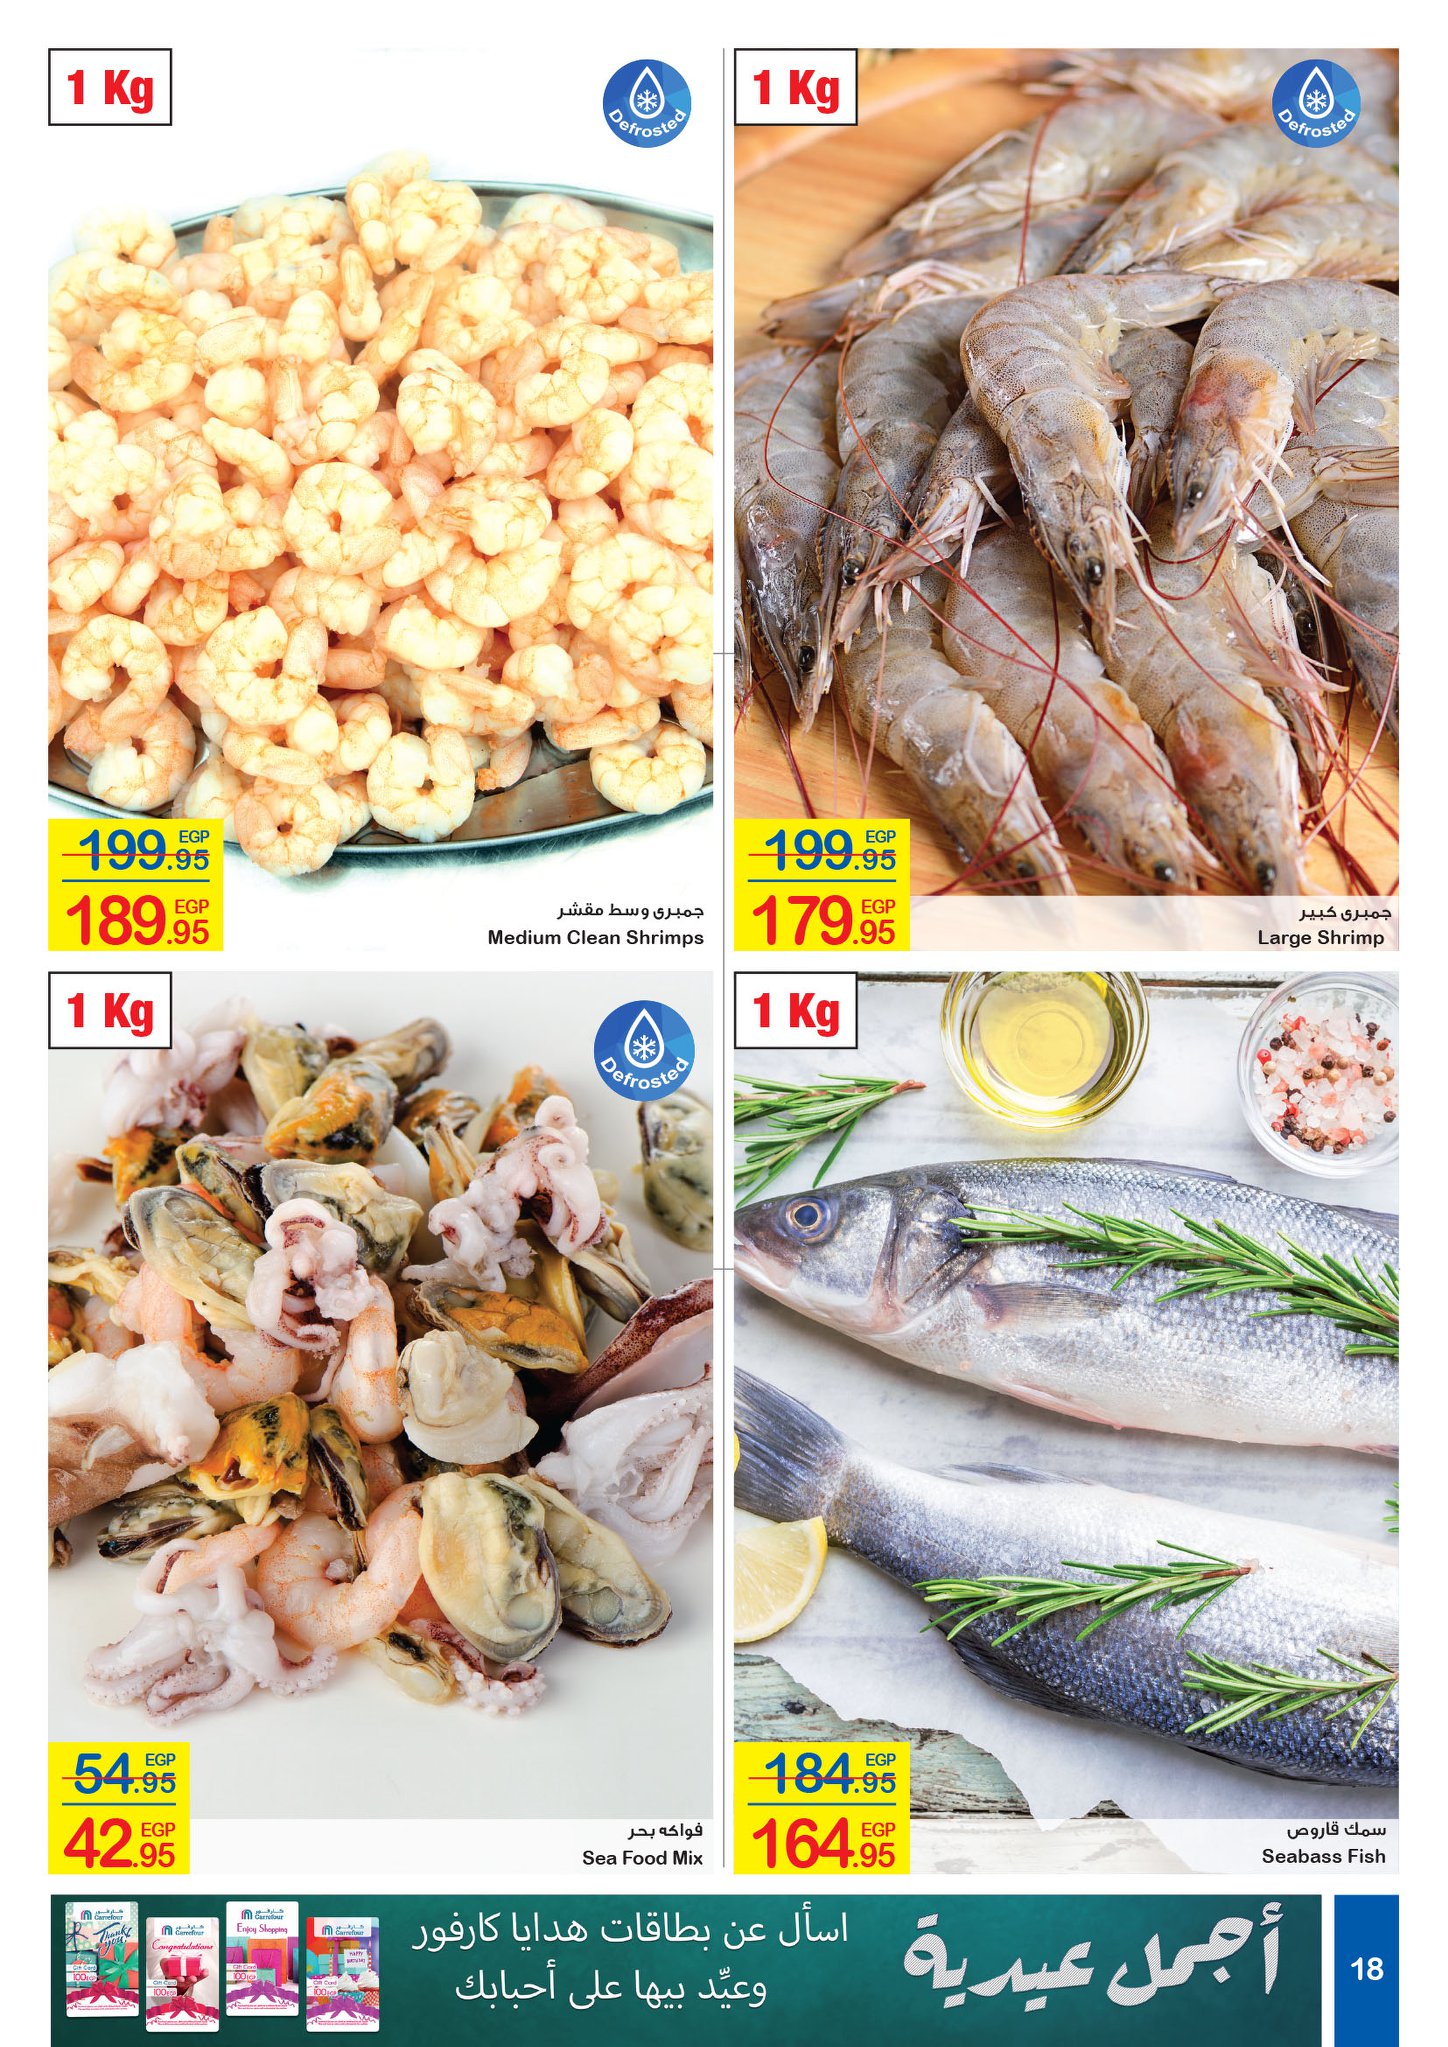 Carrefour Flyer from 16/7 till 27/7 | Carrefour Egypt 18